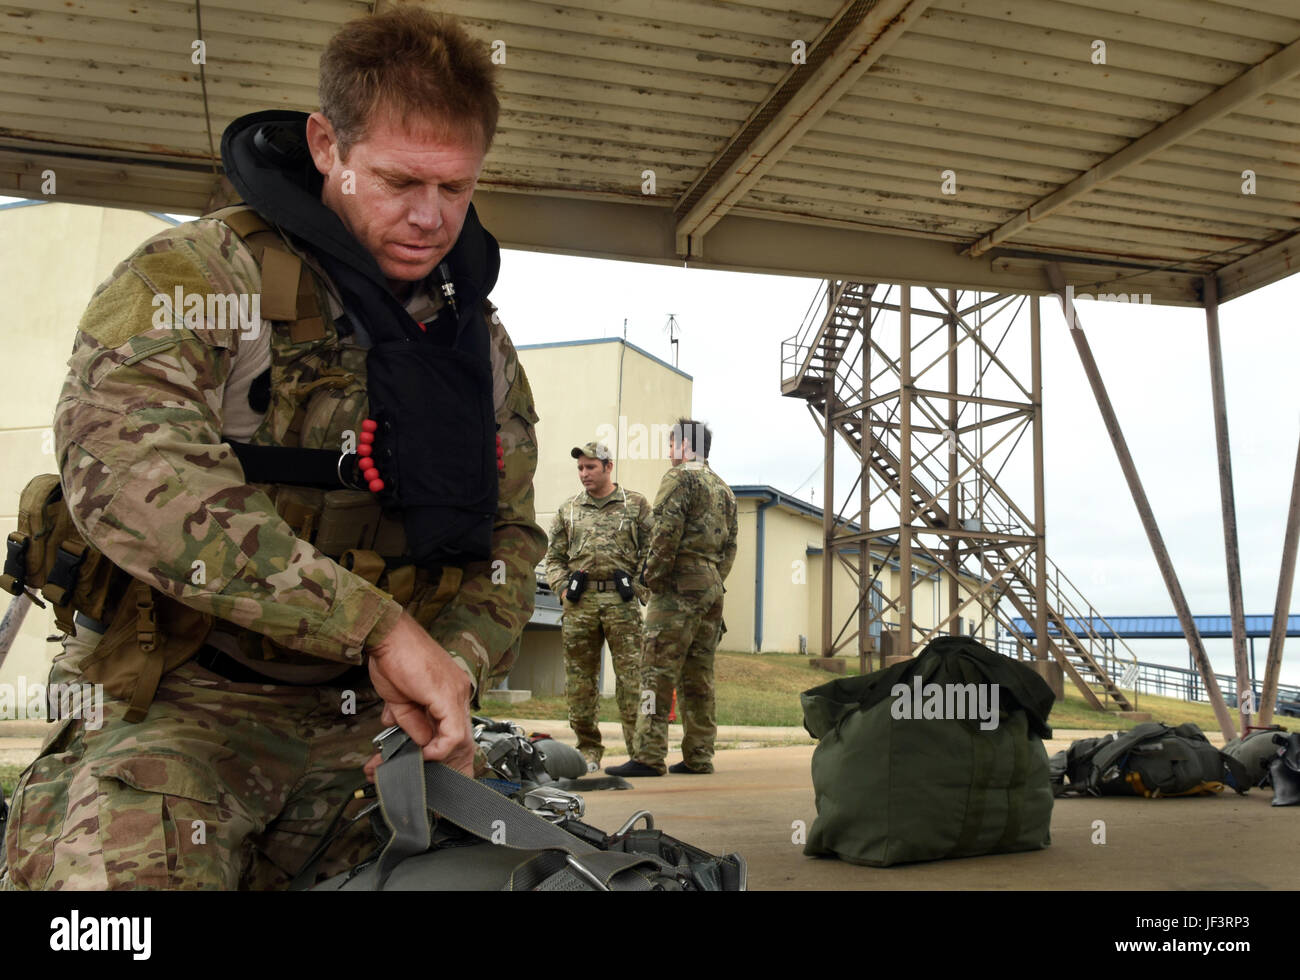 Senior Master Sgt. Andrew Hobbs, 181st Weather Flight superintendent, prepares to don his parachute equipment before a deliberate water drop into Lake Worth in Forth Worth, Texas, May 20, 2017. Hobbs is part of the Air Force Special Operations Weather Team, and as a member must undergo unique training to operate in hostile and denied territories to provide on-the-ground weather reporting. (Texas Air National Guard photo by Staff Sgt. Kristina Overton) Stock Photo